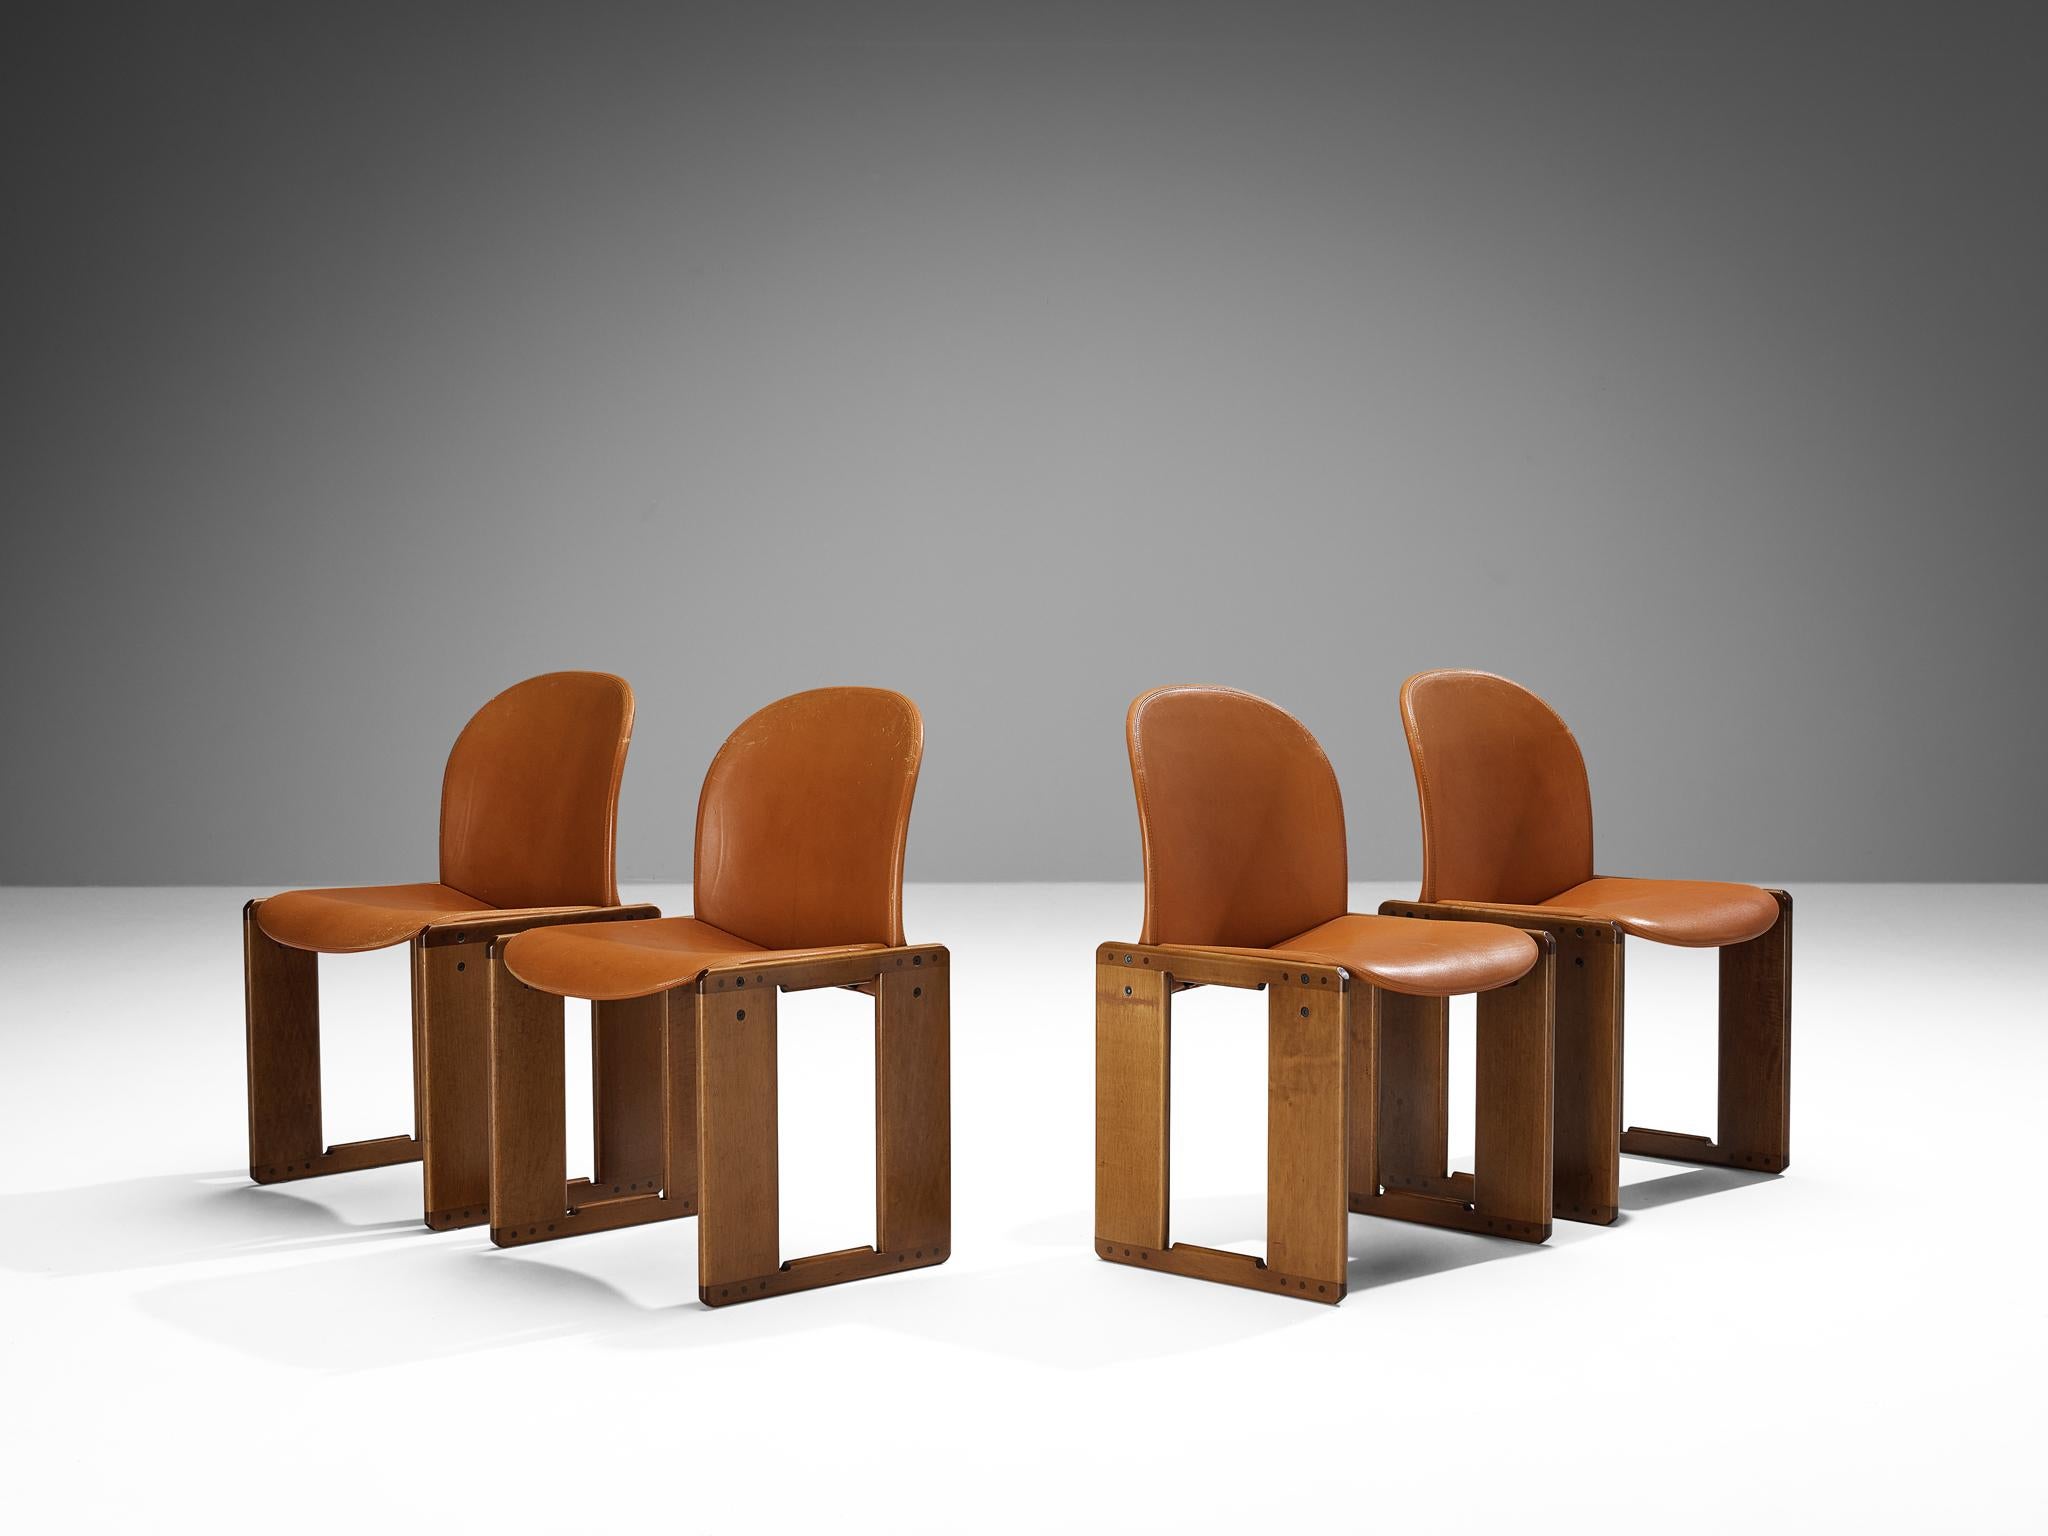 Afra and Tobia Scarpa for B&B, set of four ‘Dialogo’ dining chairs, walnut, cognac leather, metal, Italy, 1974
 
The ‘Dialogo’ dining chair was designed by Afra and Tobia Scarpa in 1974 and convinces with its two angular frames where the seat with